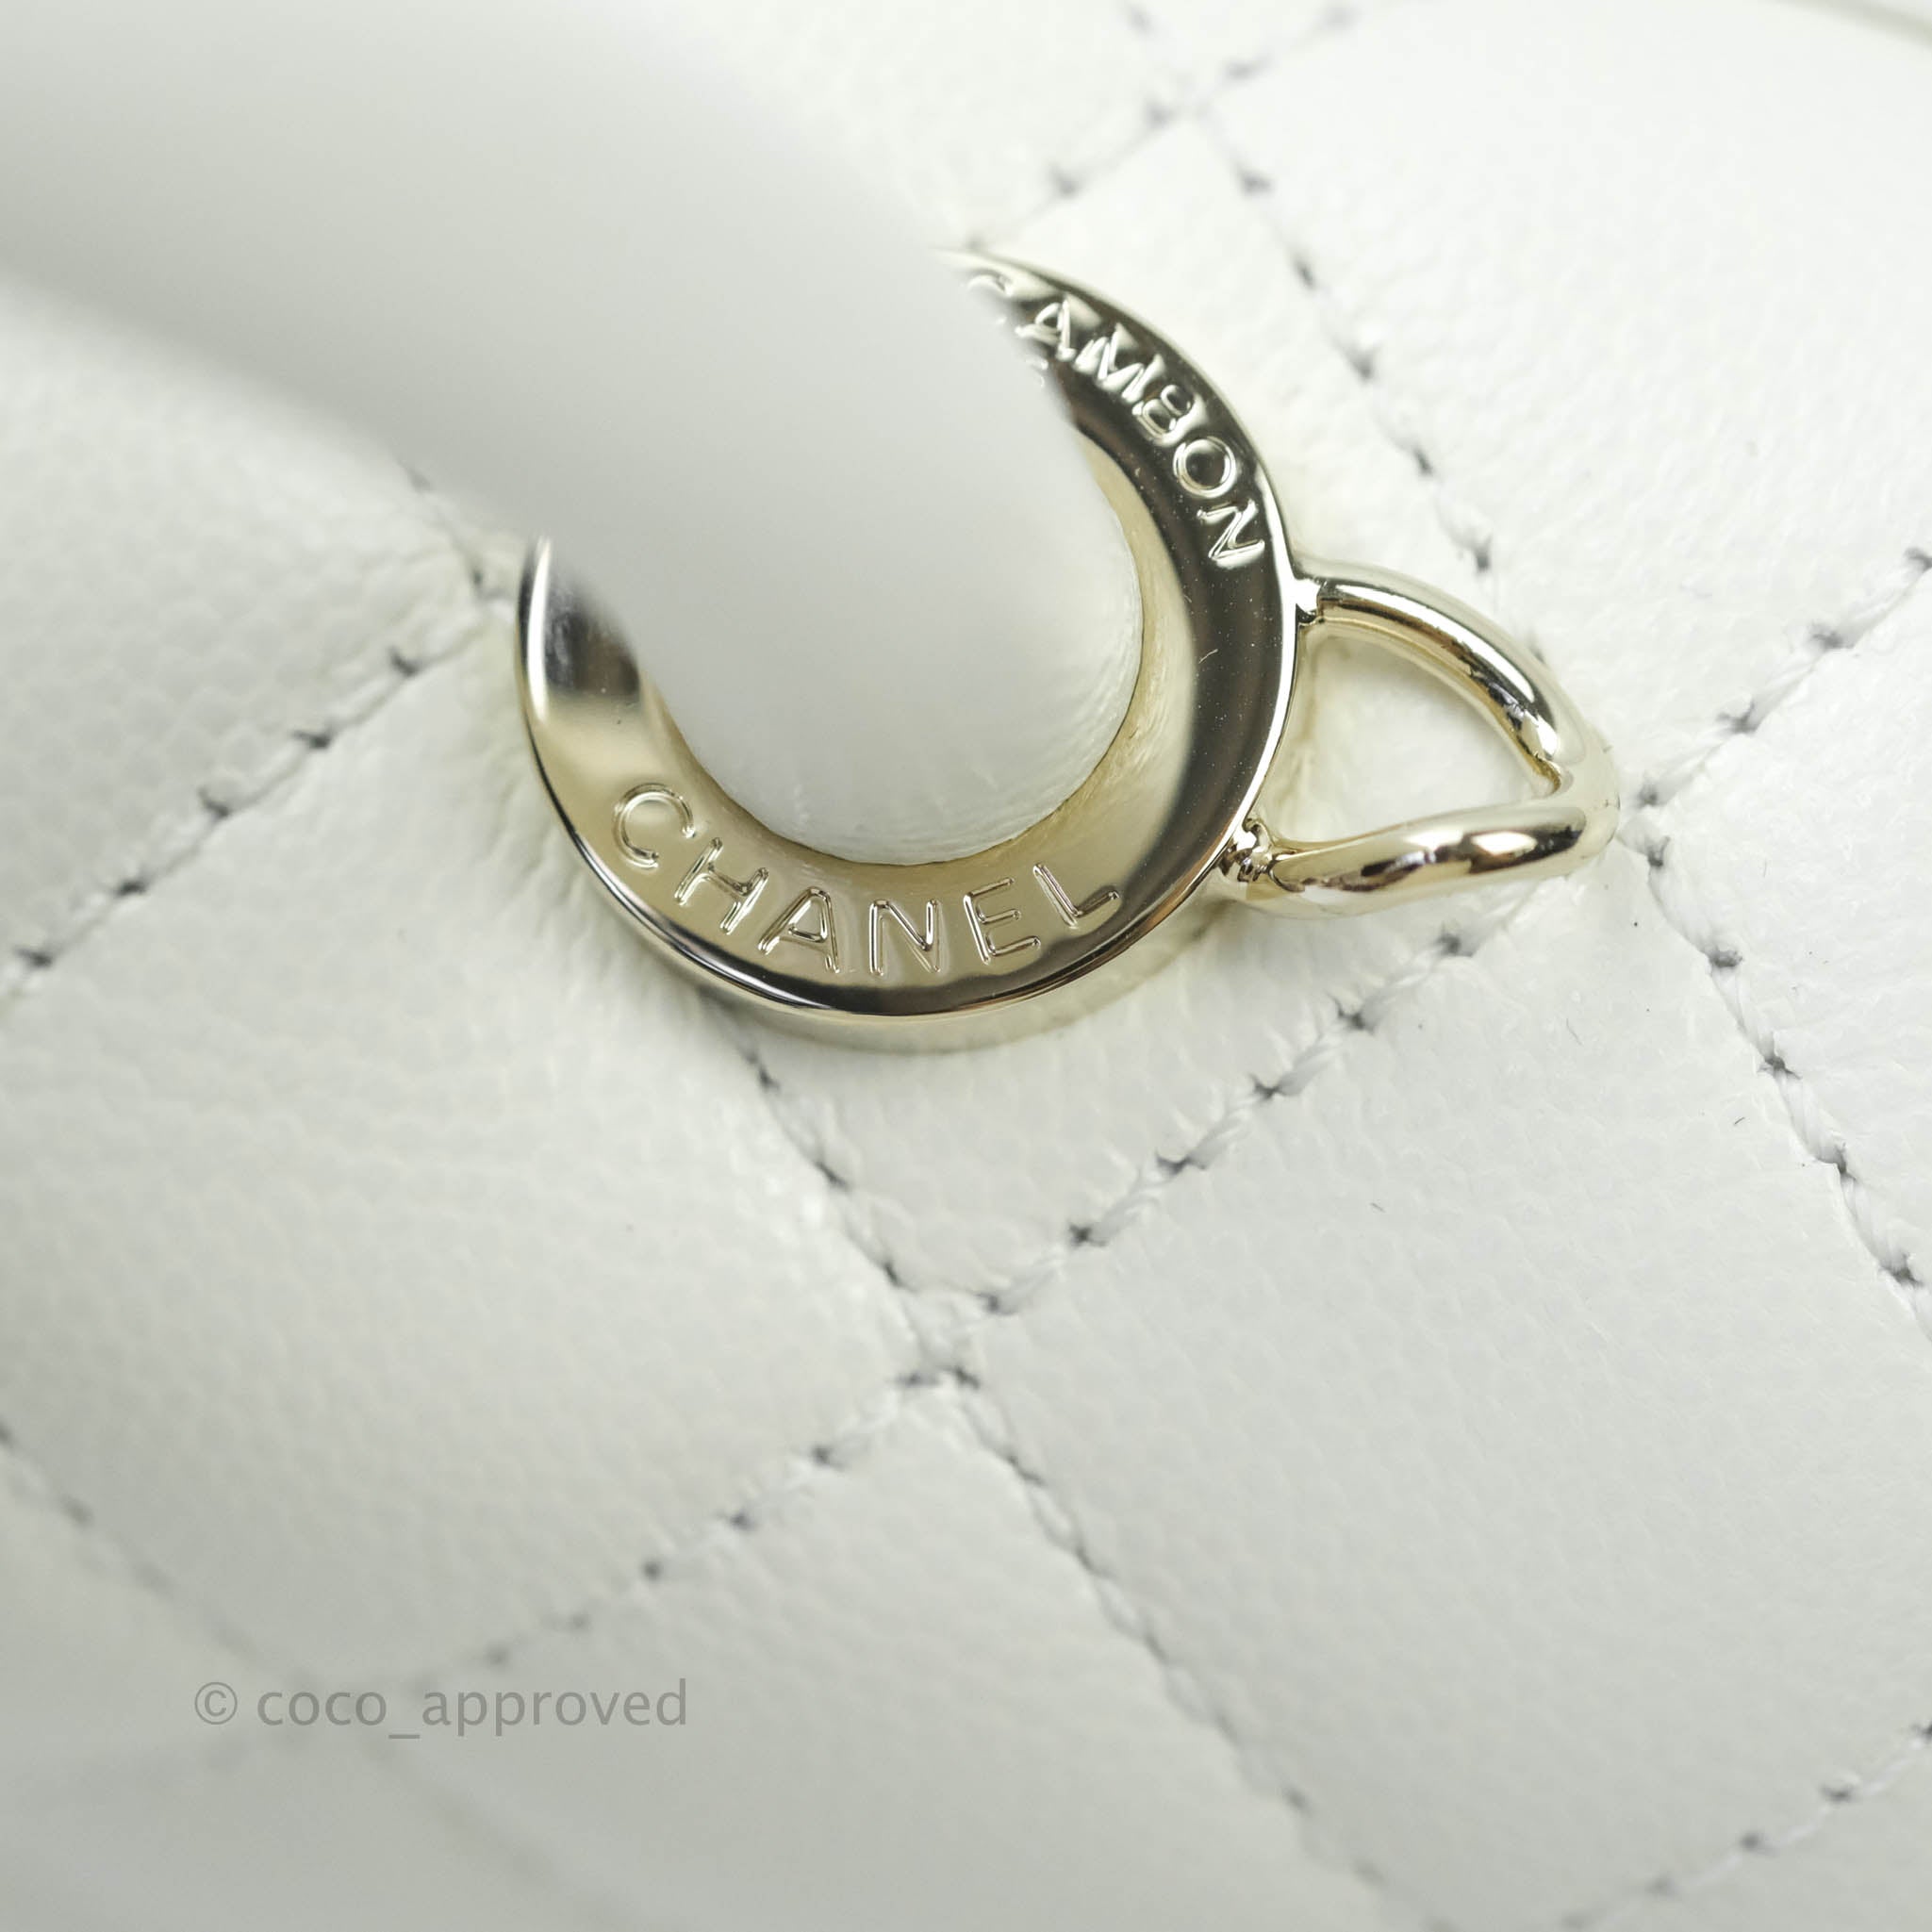 CHANEL Caviar Quilted Small Coco Handle Flap White 1286833